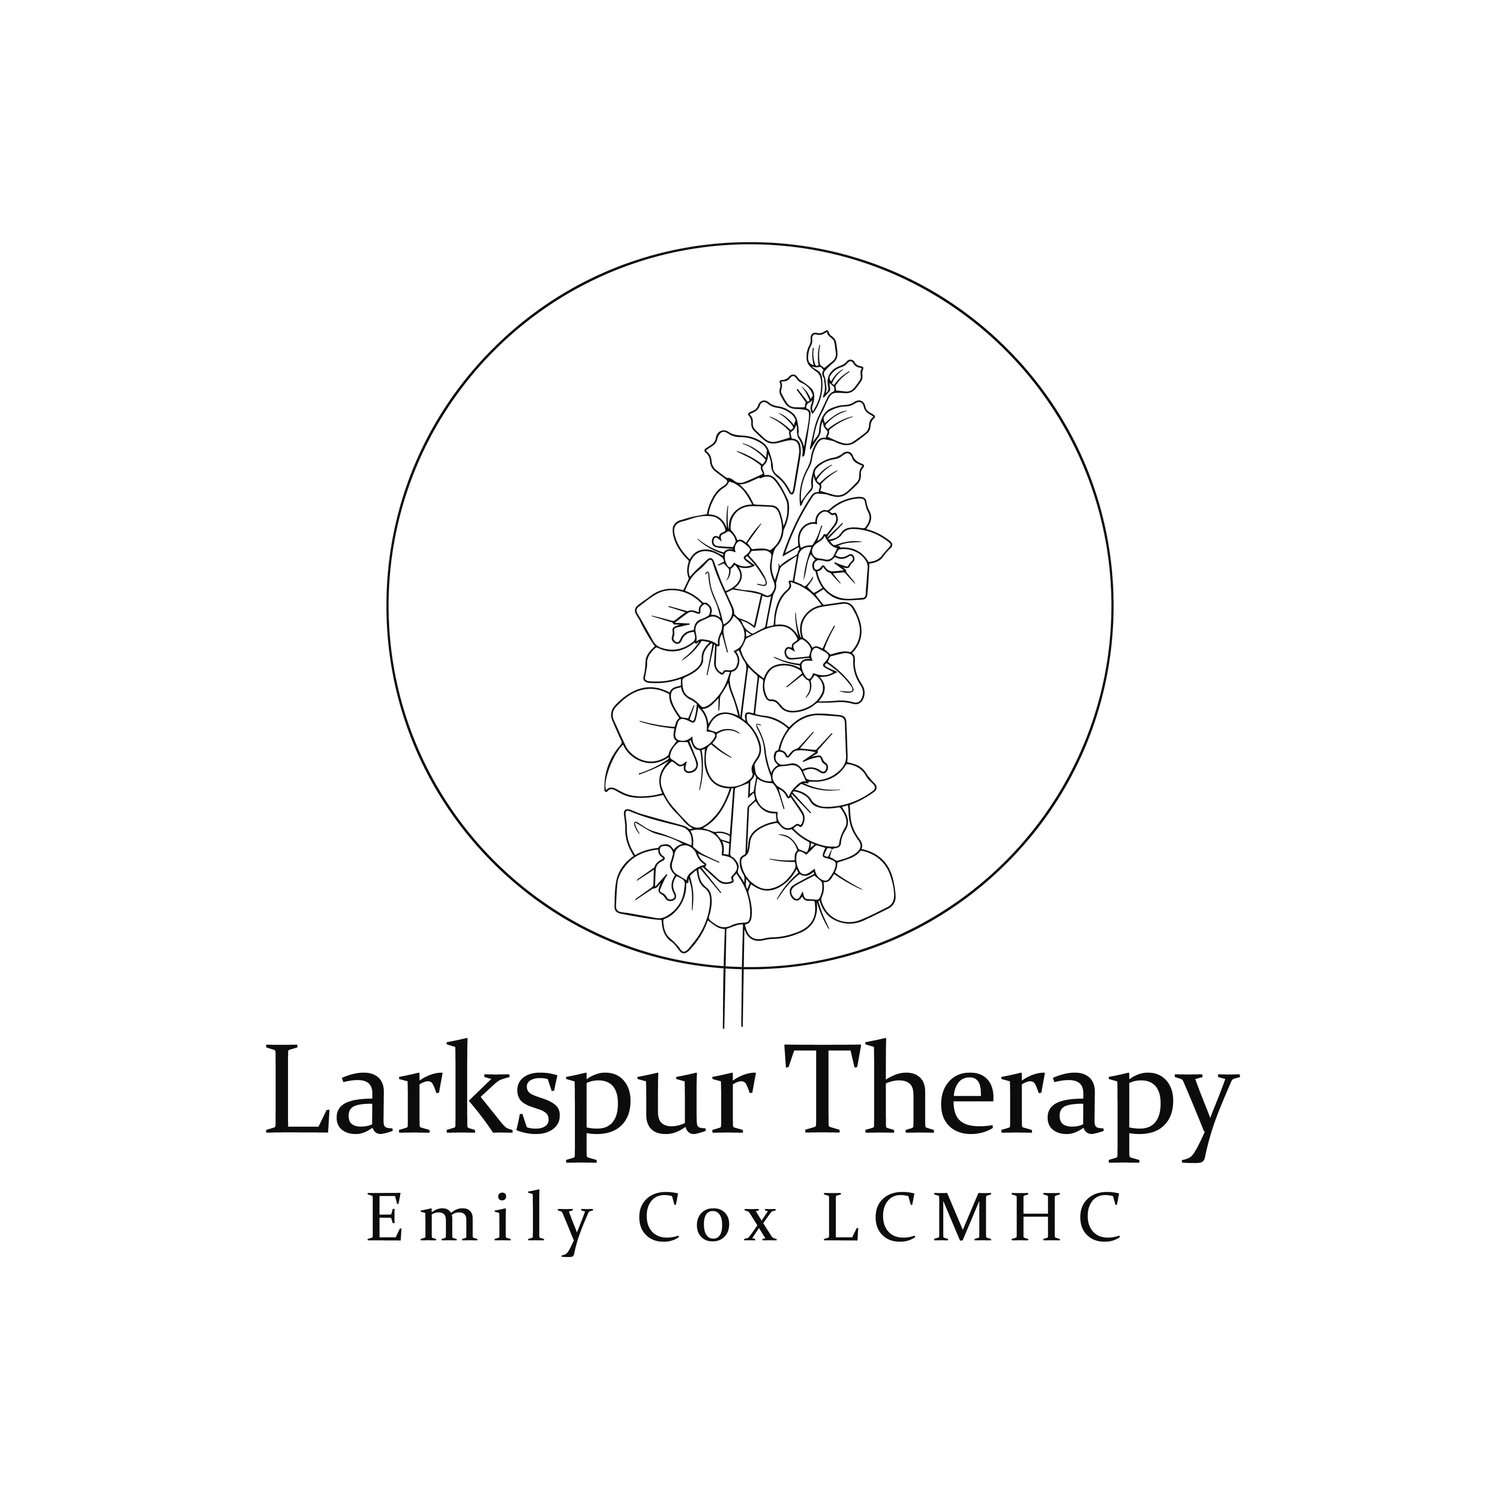 Larkspur Therapy -Emily Cox LCMHC